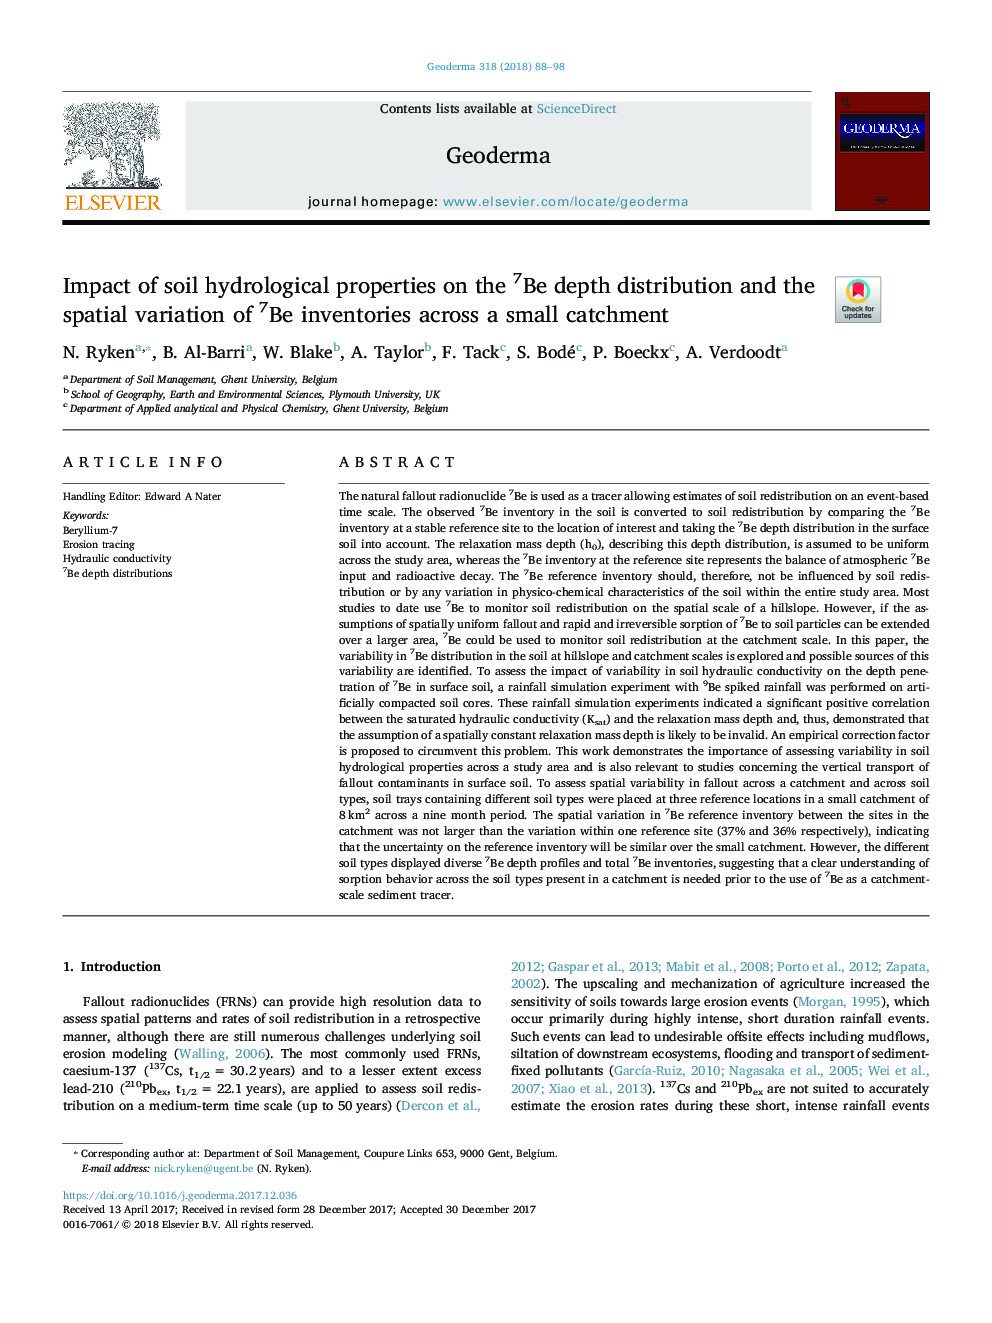 Impact of soil hydrological properties on the 7Be depth distribution and the spatial variation of 7Be inventories across a small catchment